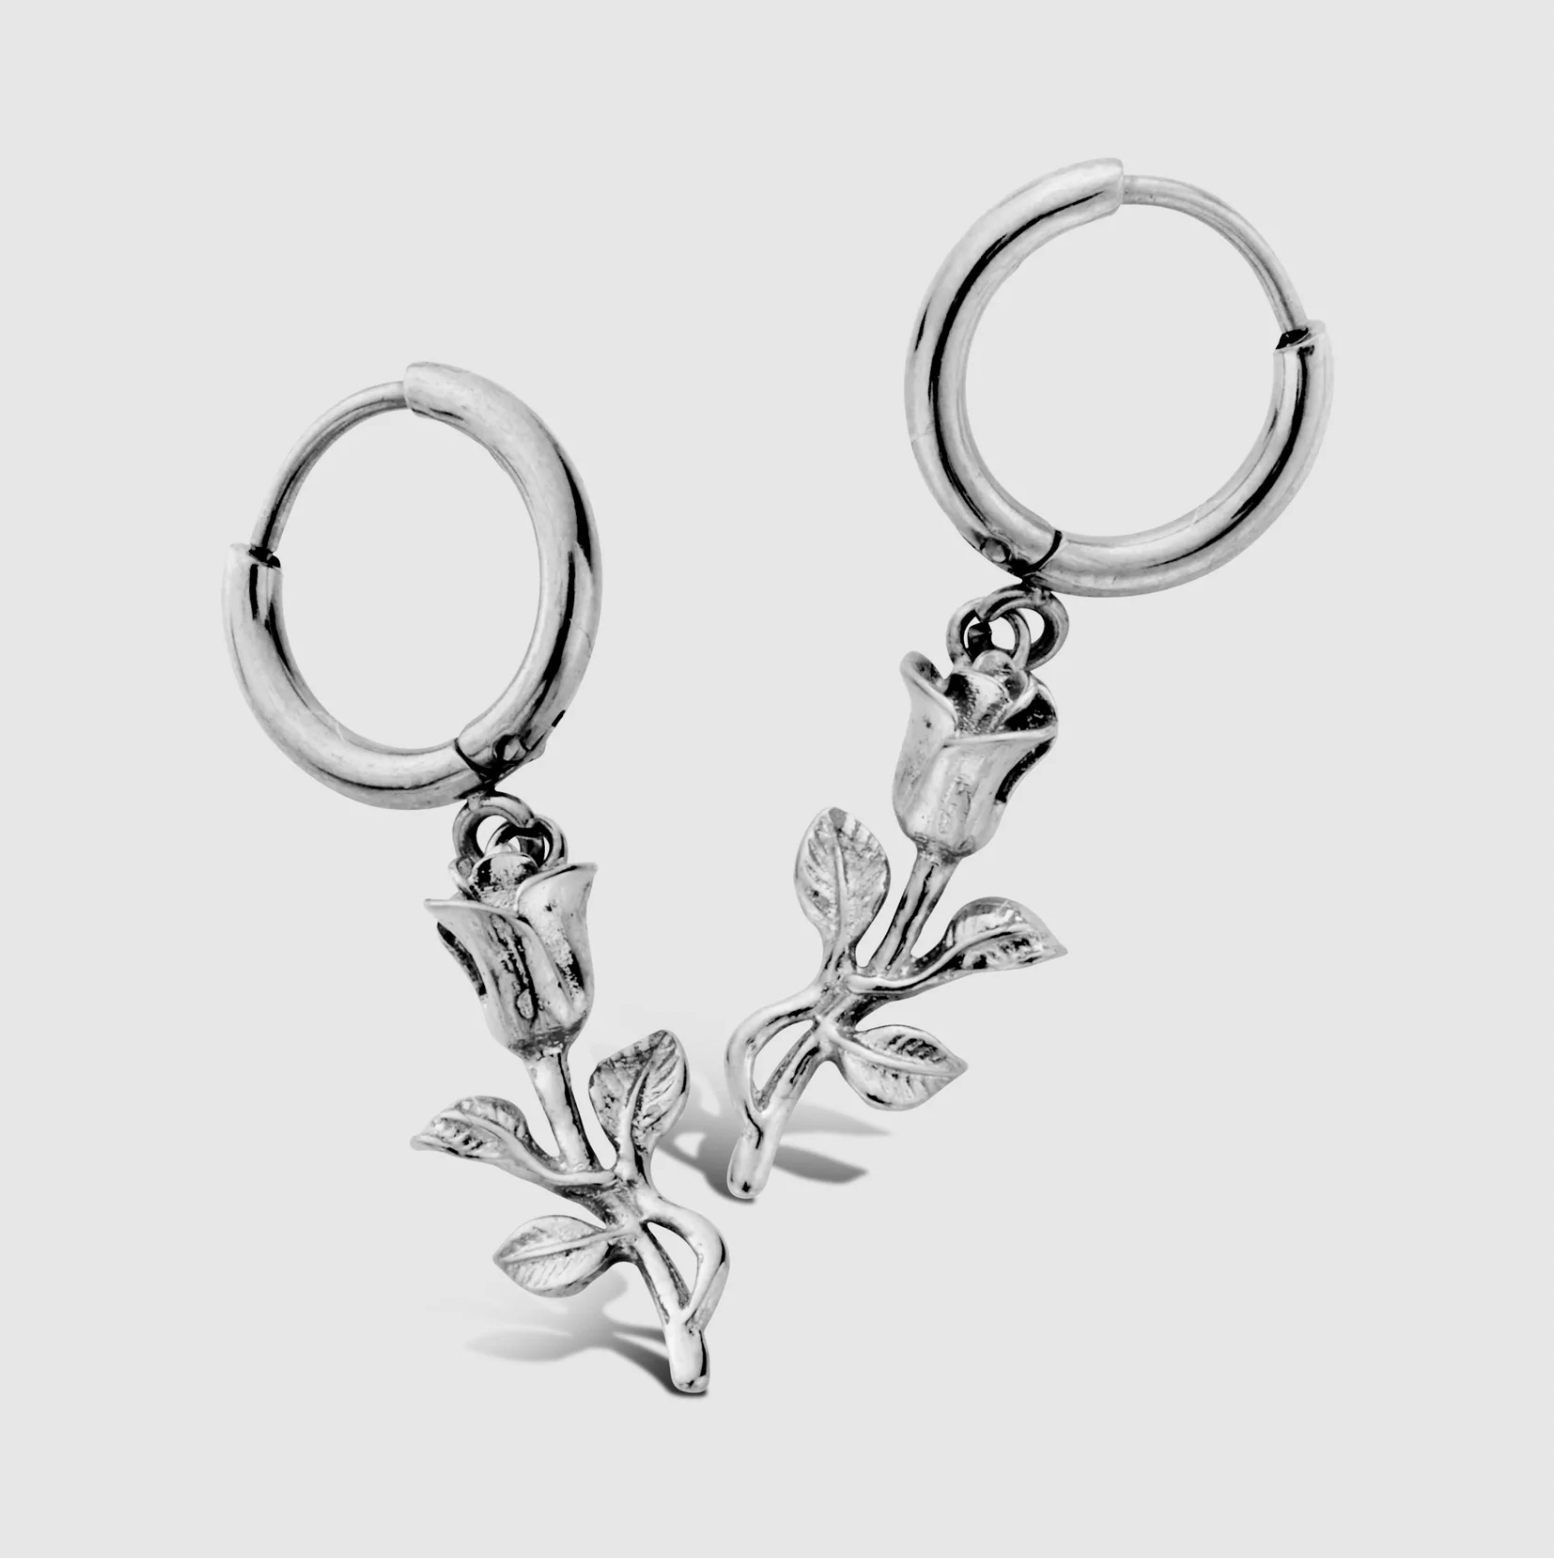 ROSE EARRINGS in a Silver Shade (a pair)